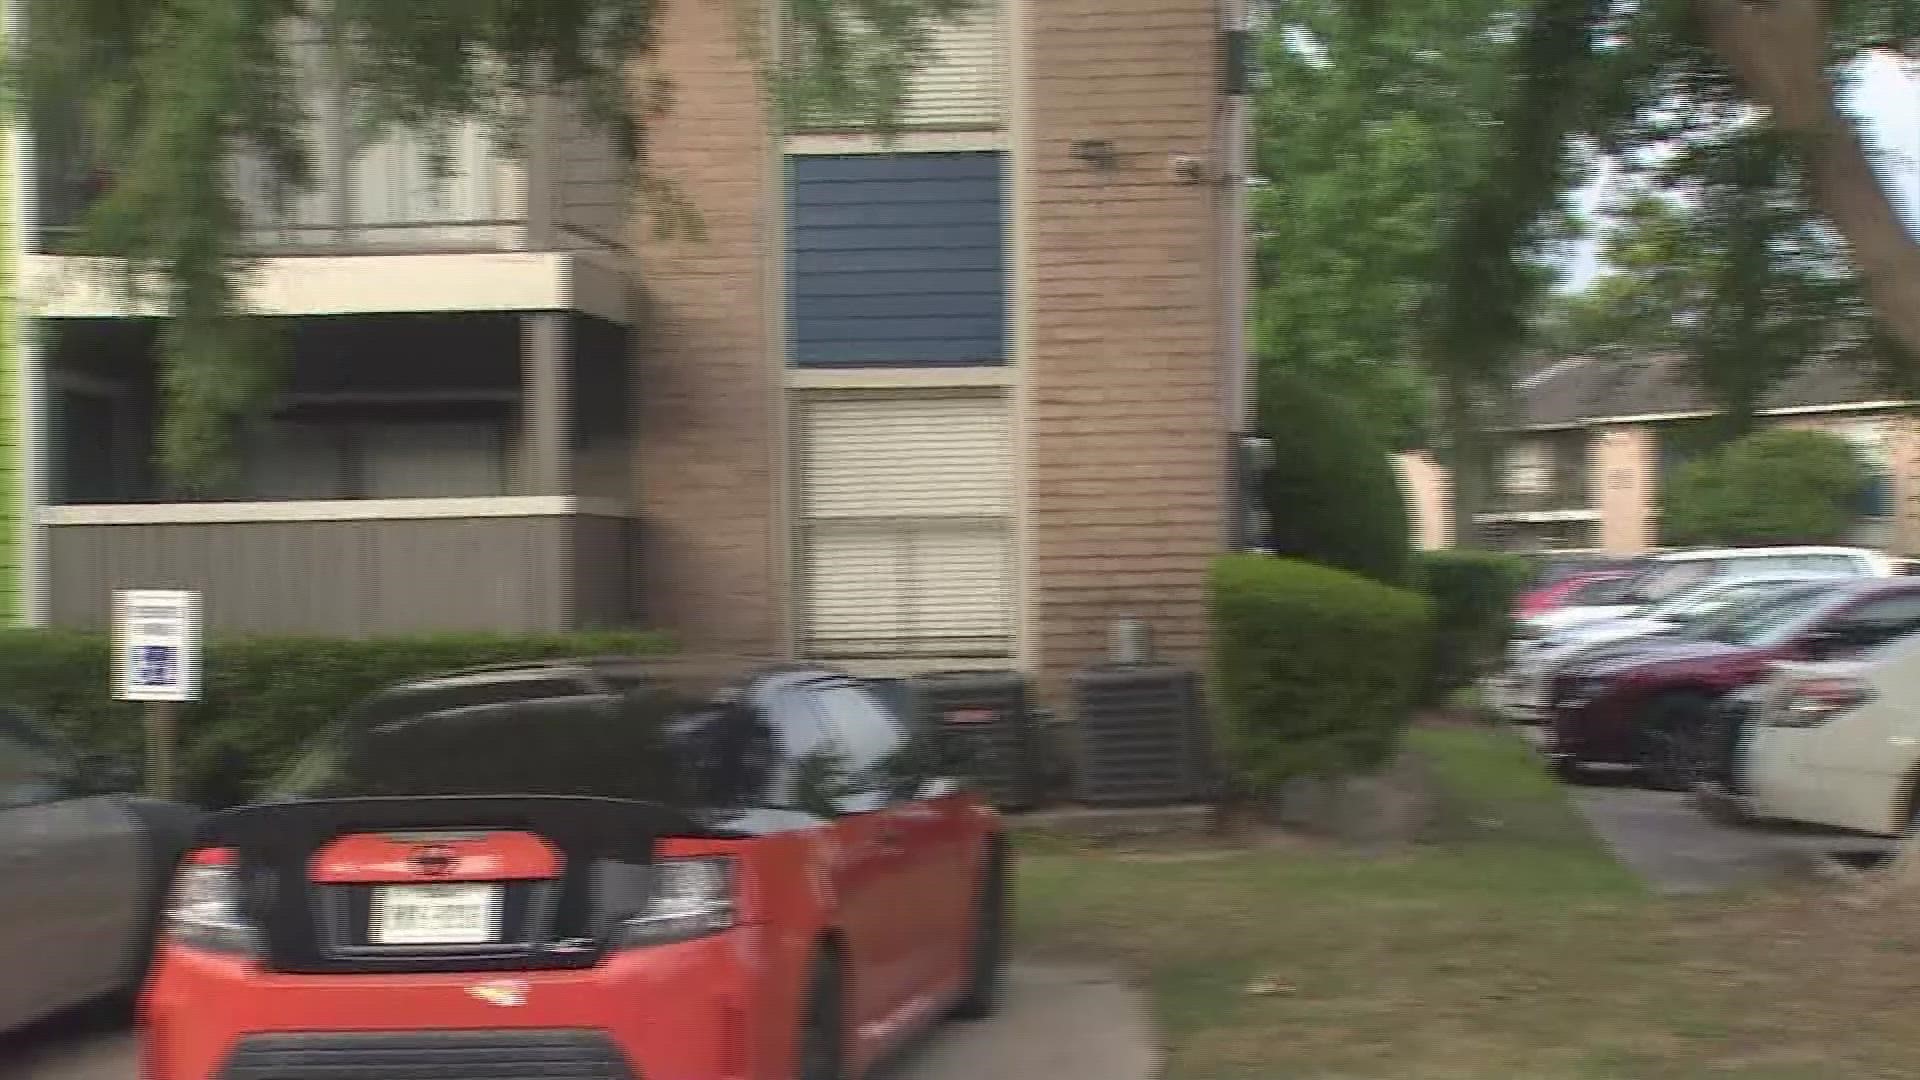 Two women were killed in an apparent murder-suicide at a north Harris County apartment complex Friday morning.